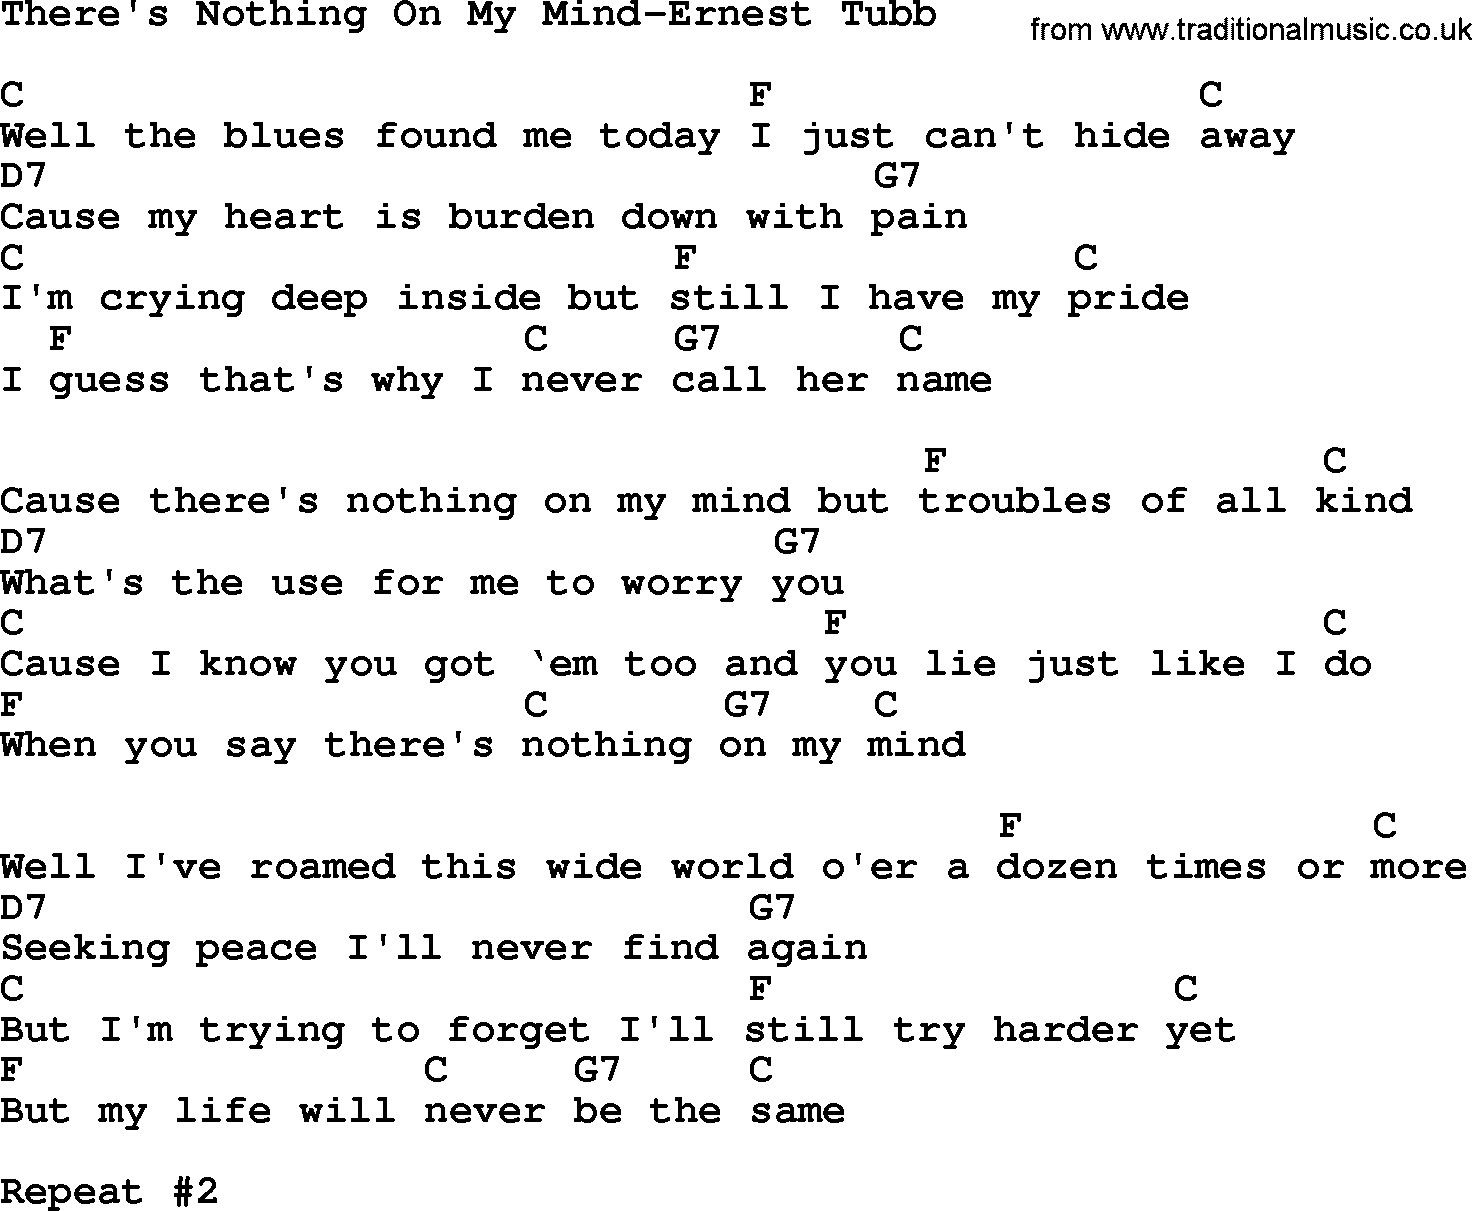 Country music song: There's Nothing On My Mind-Ernest Tubb lyrics and chords